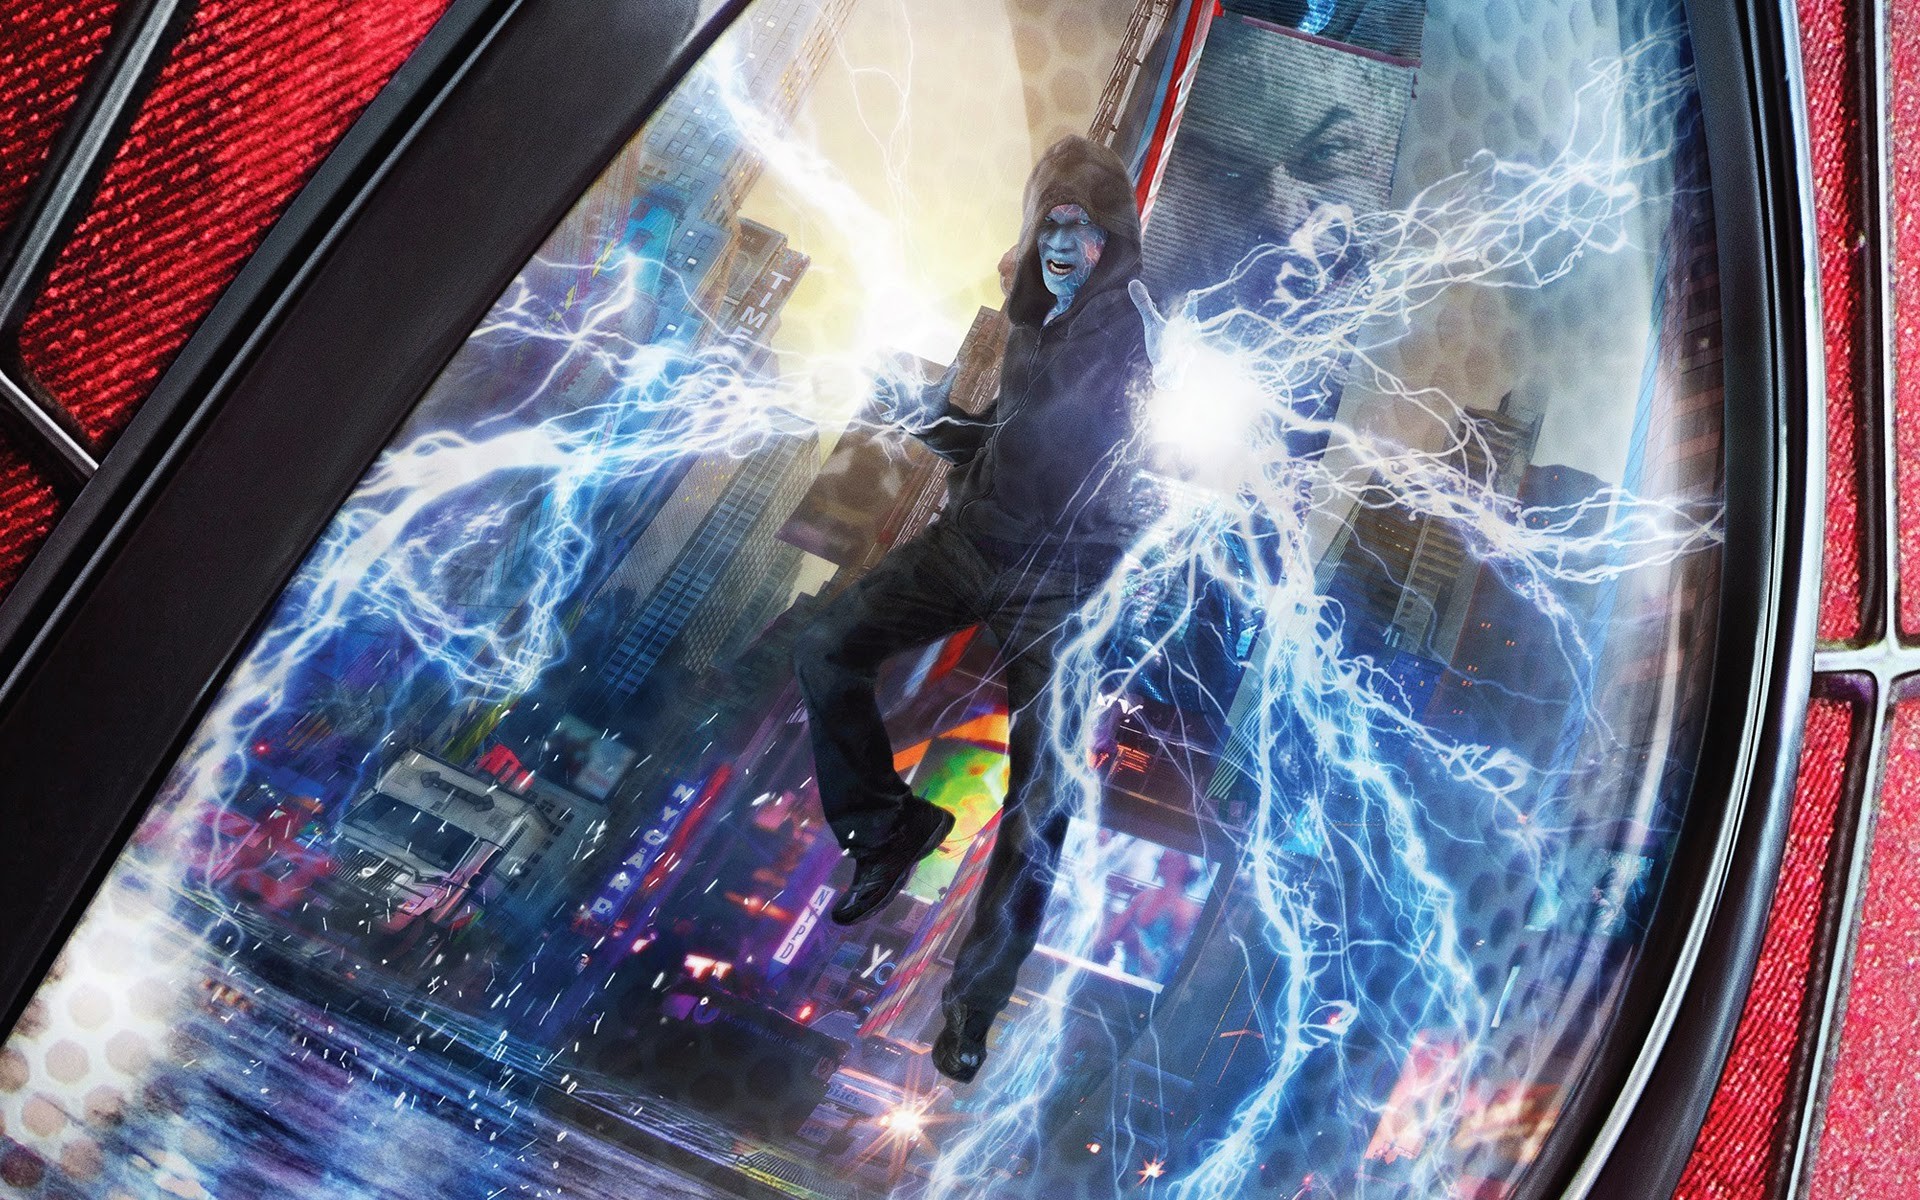 1920x1200 Spider-Man images The Amazing Spider-Man 2 - New Poster HD .